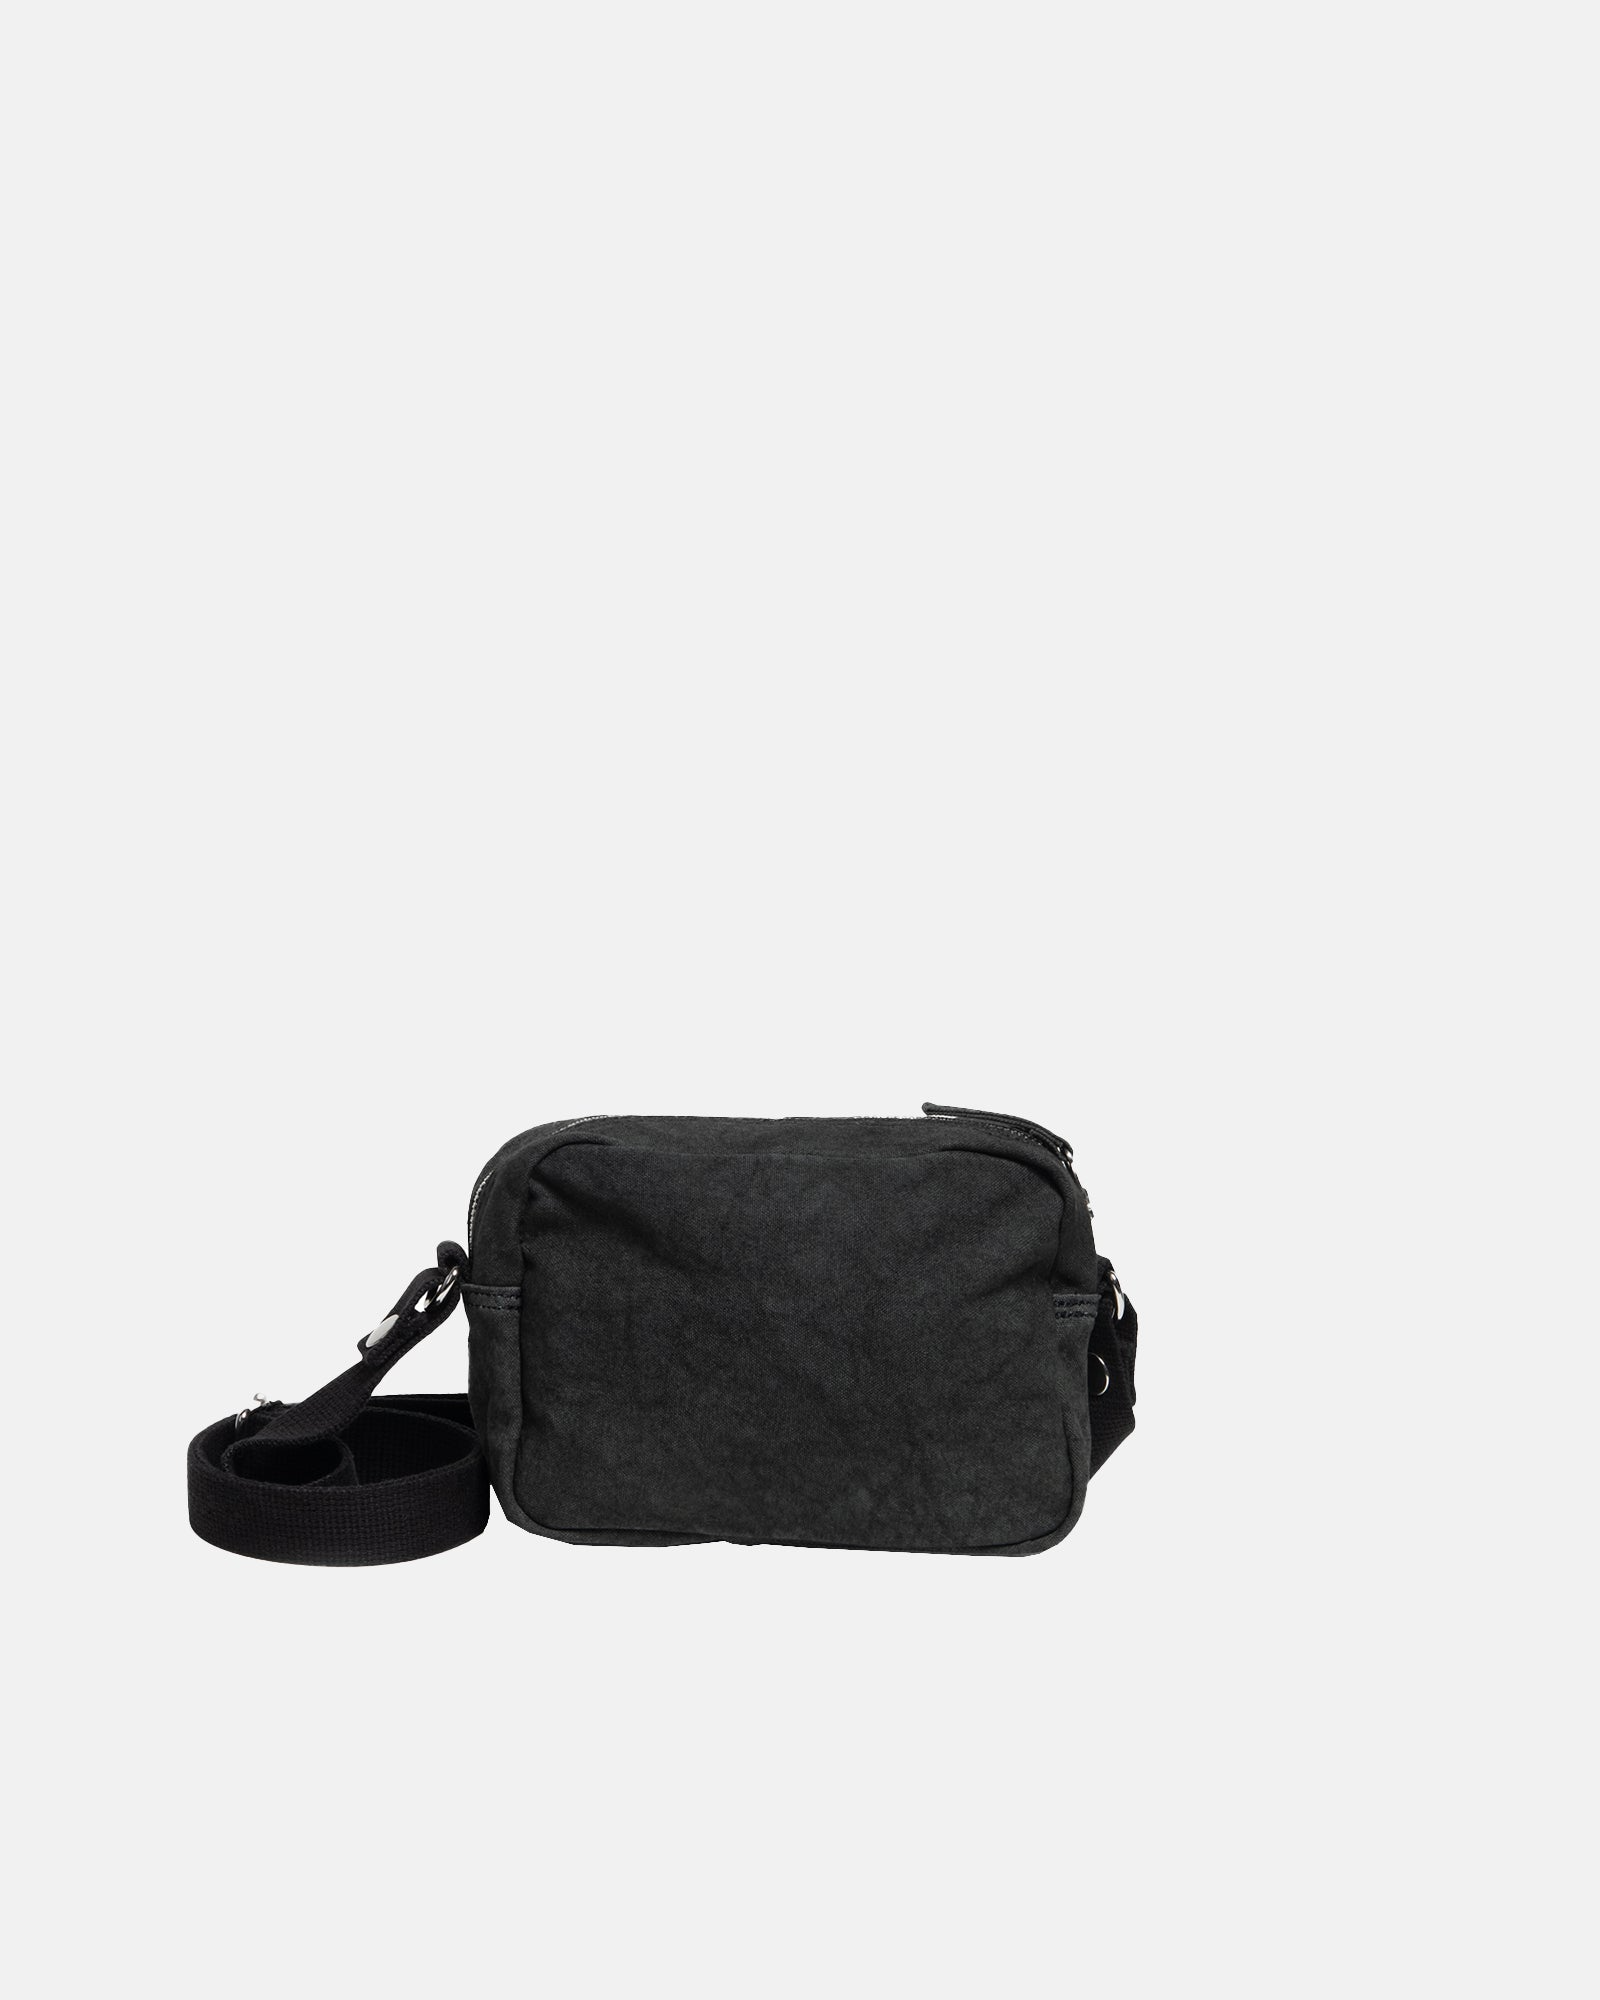 STUSSY CANVAS SIDE POUCH 側背包